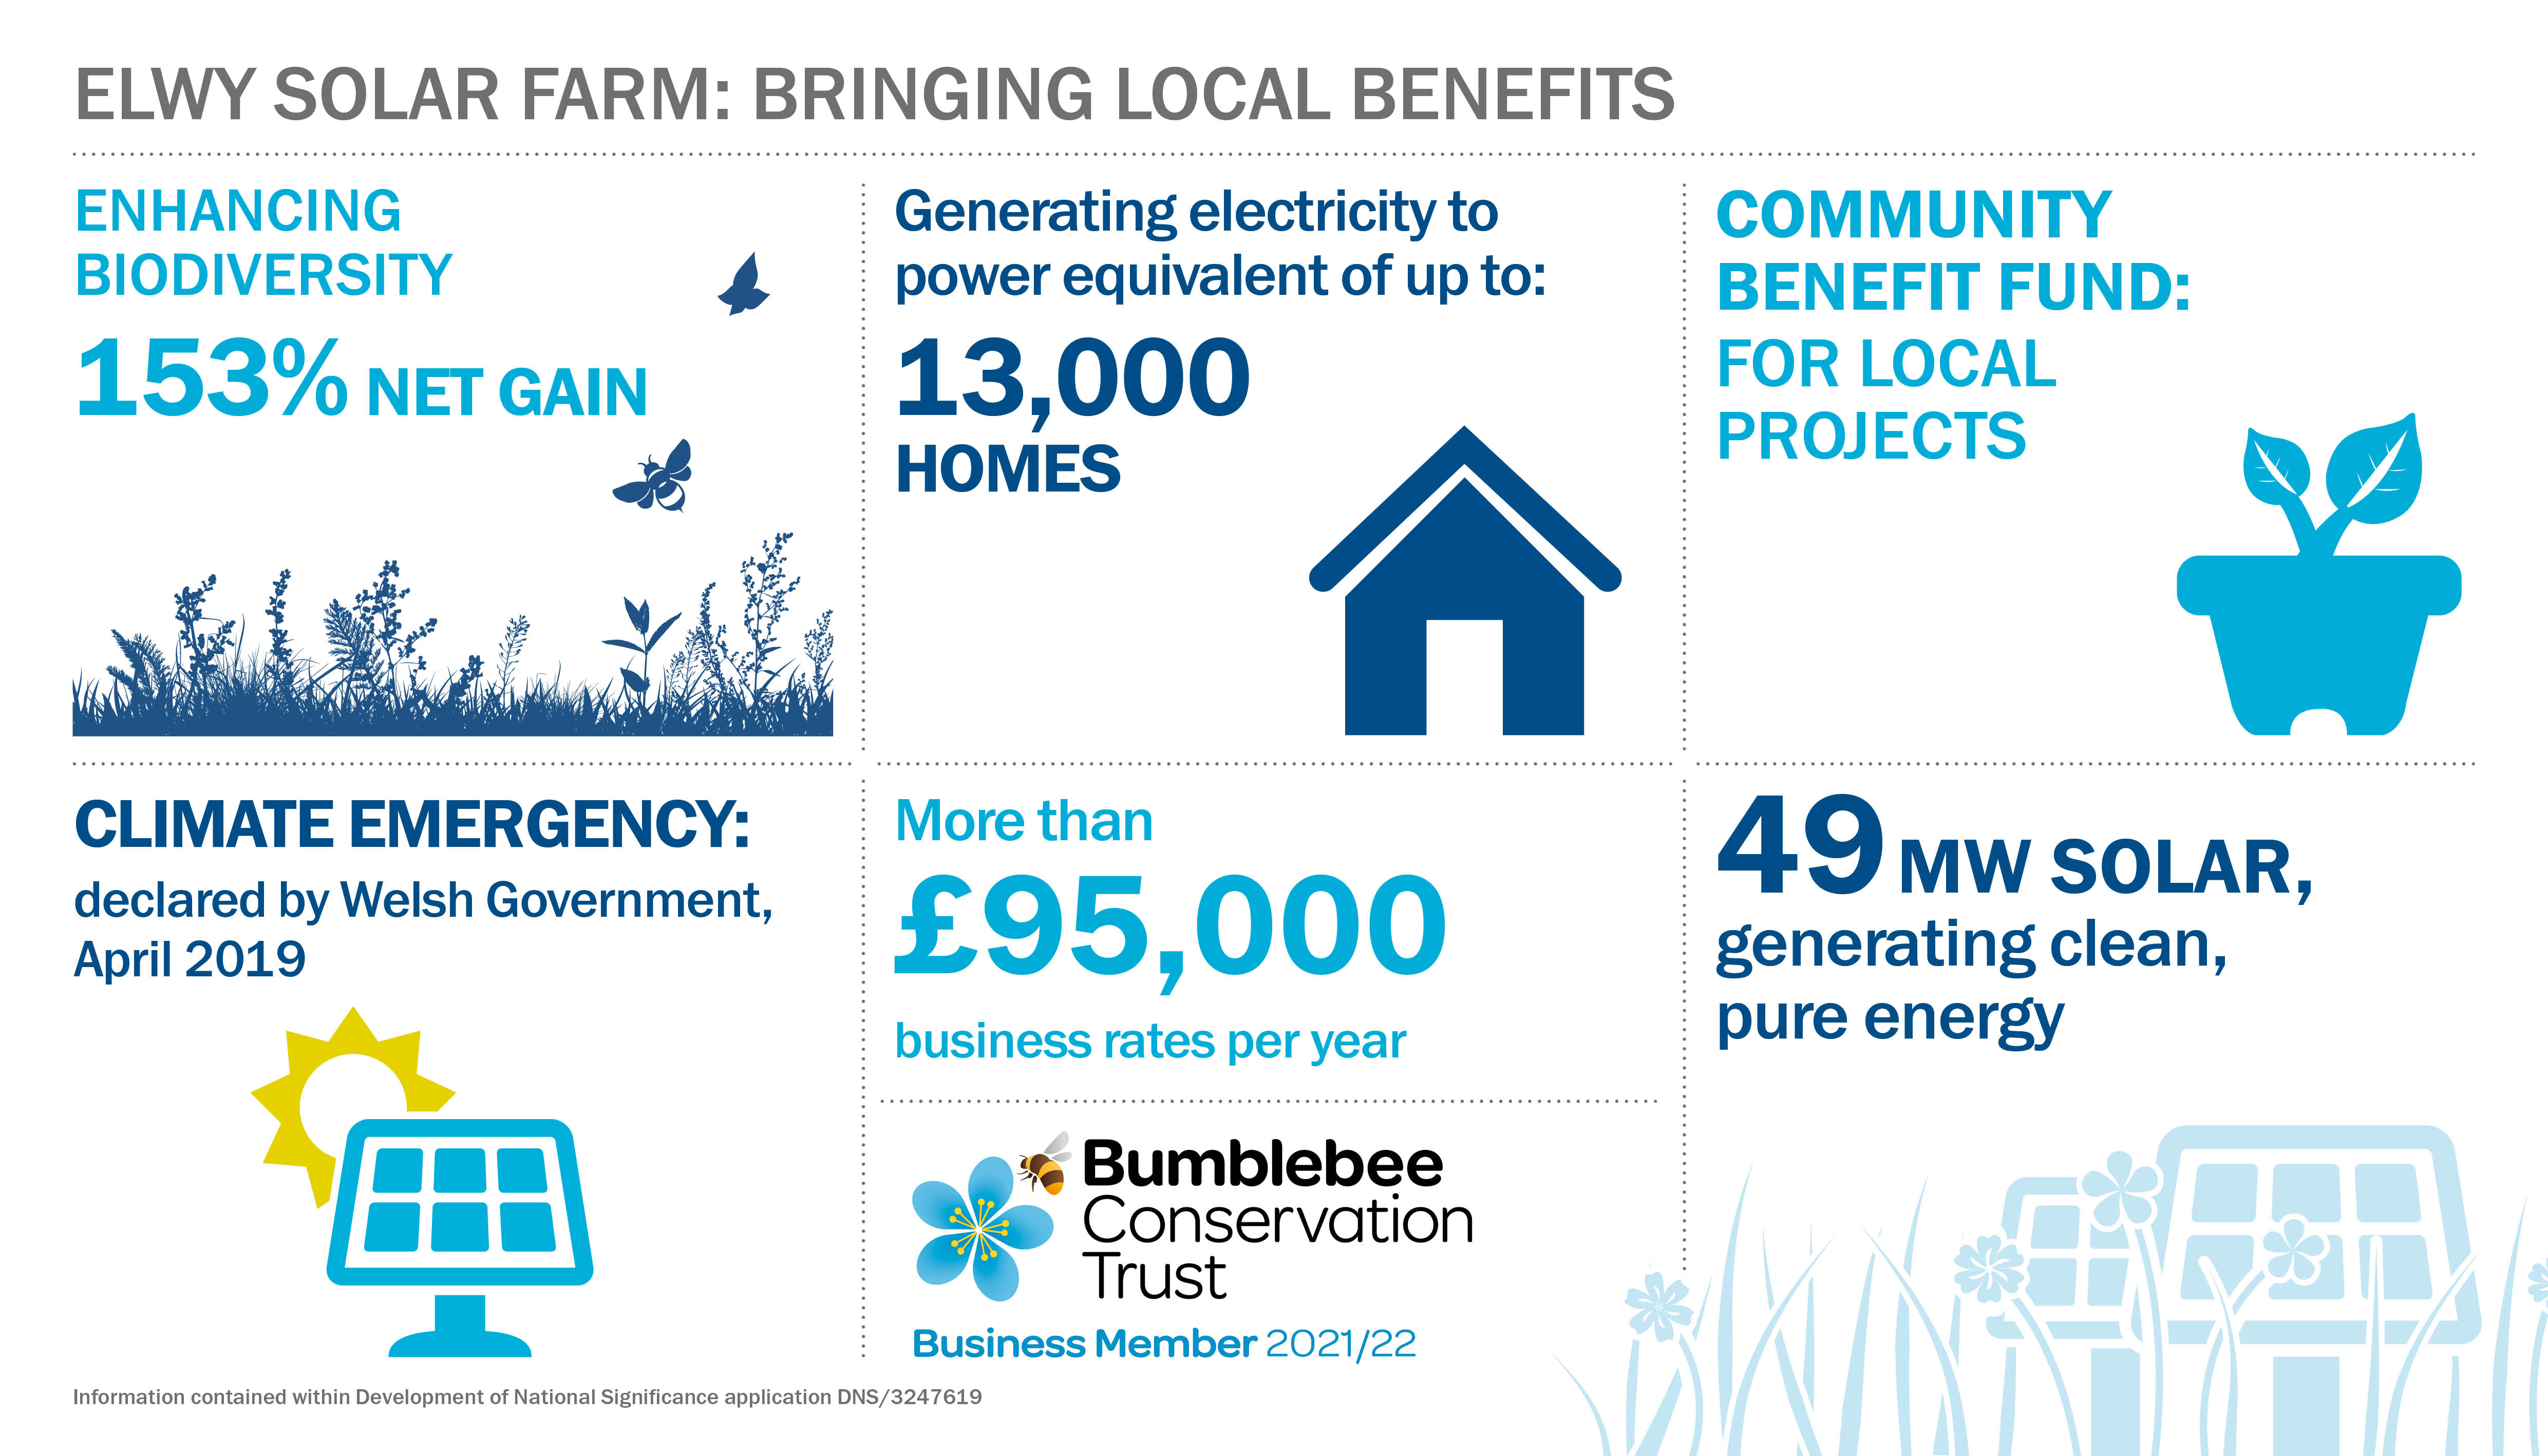 Graphic highlighting key project information: "Enhancing Biodiversity 153% Net Gain"; "Generating electricity to power equivalent of up to 13,000 homes"; "Community benefit fund for local projects" ; "Climate emergency declared by Welsh Government, April 2019"; "More than £95,000 business rates per year"; "49MW solar generating clean, pure energy"